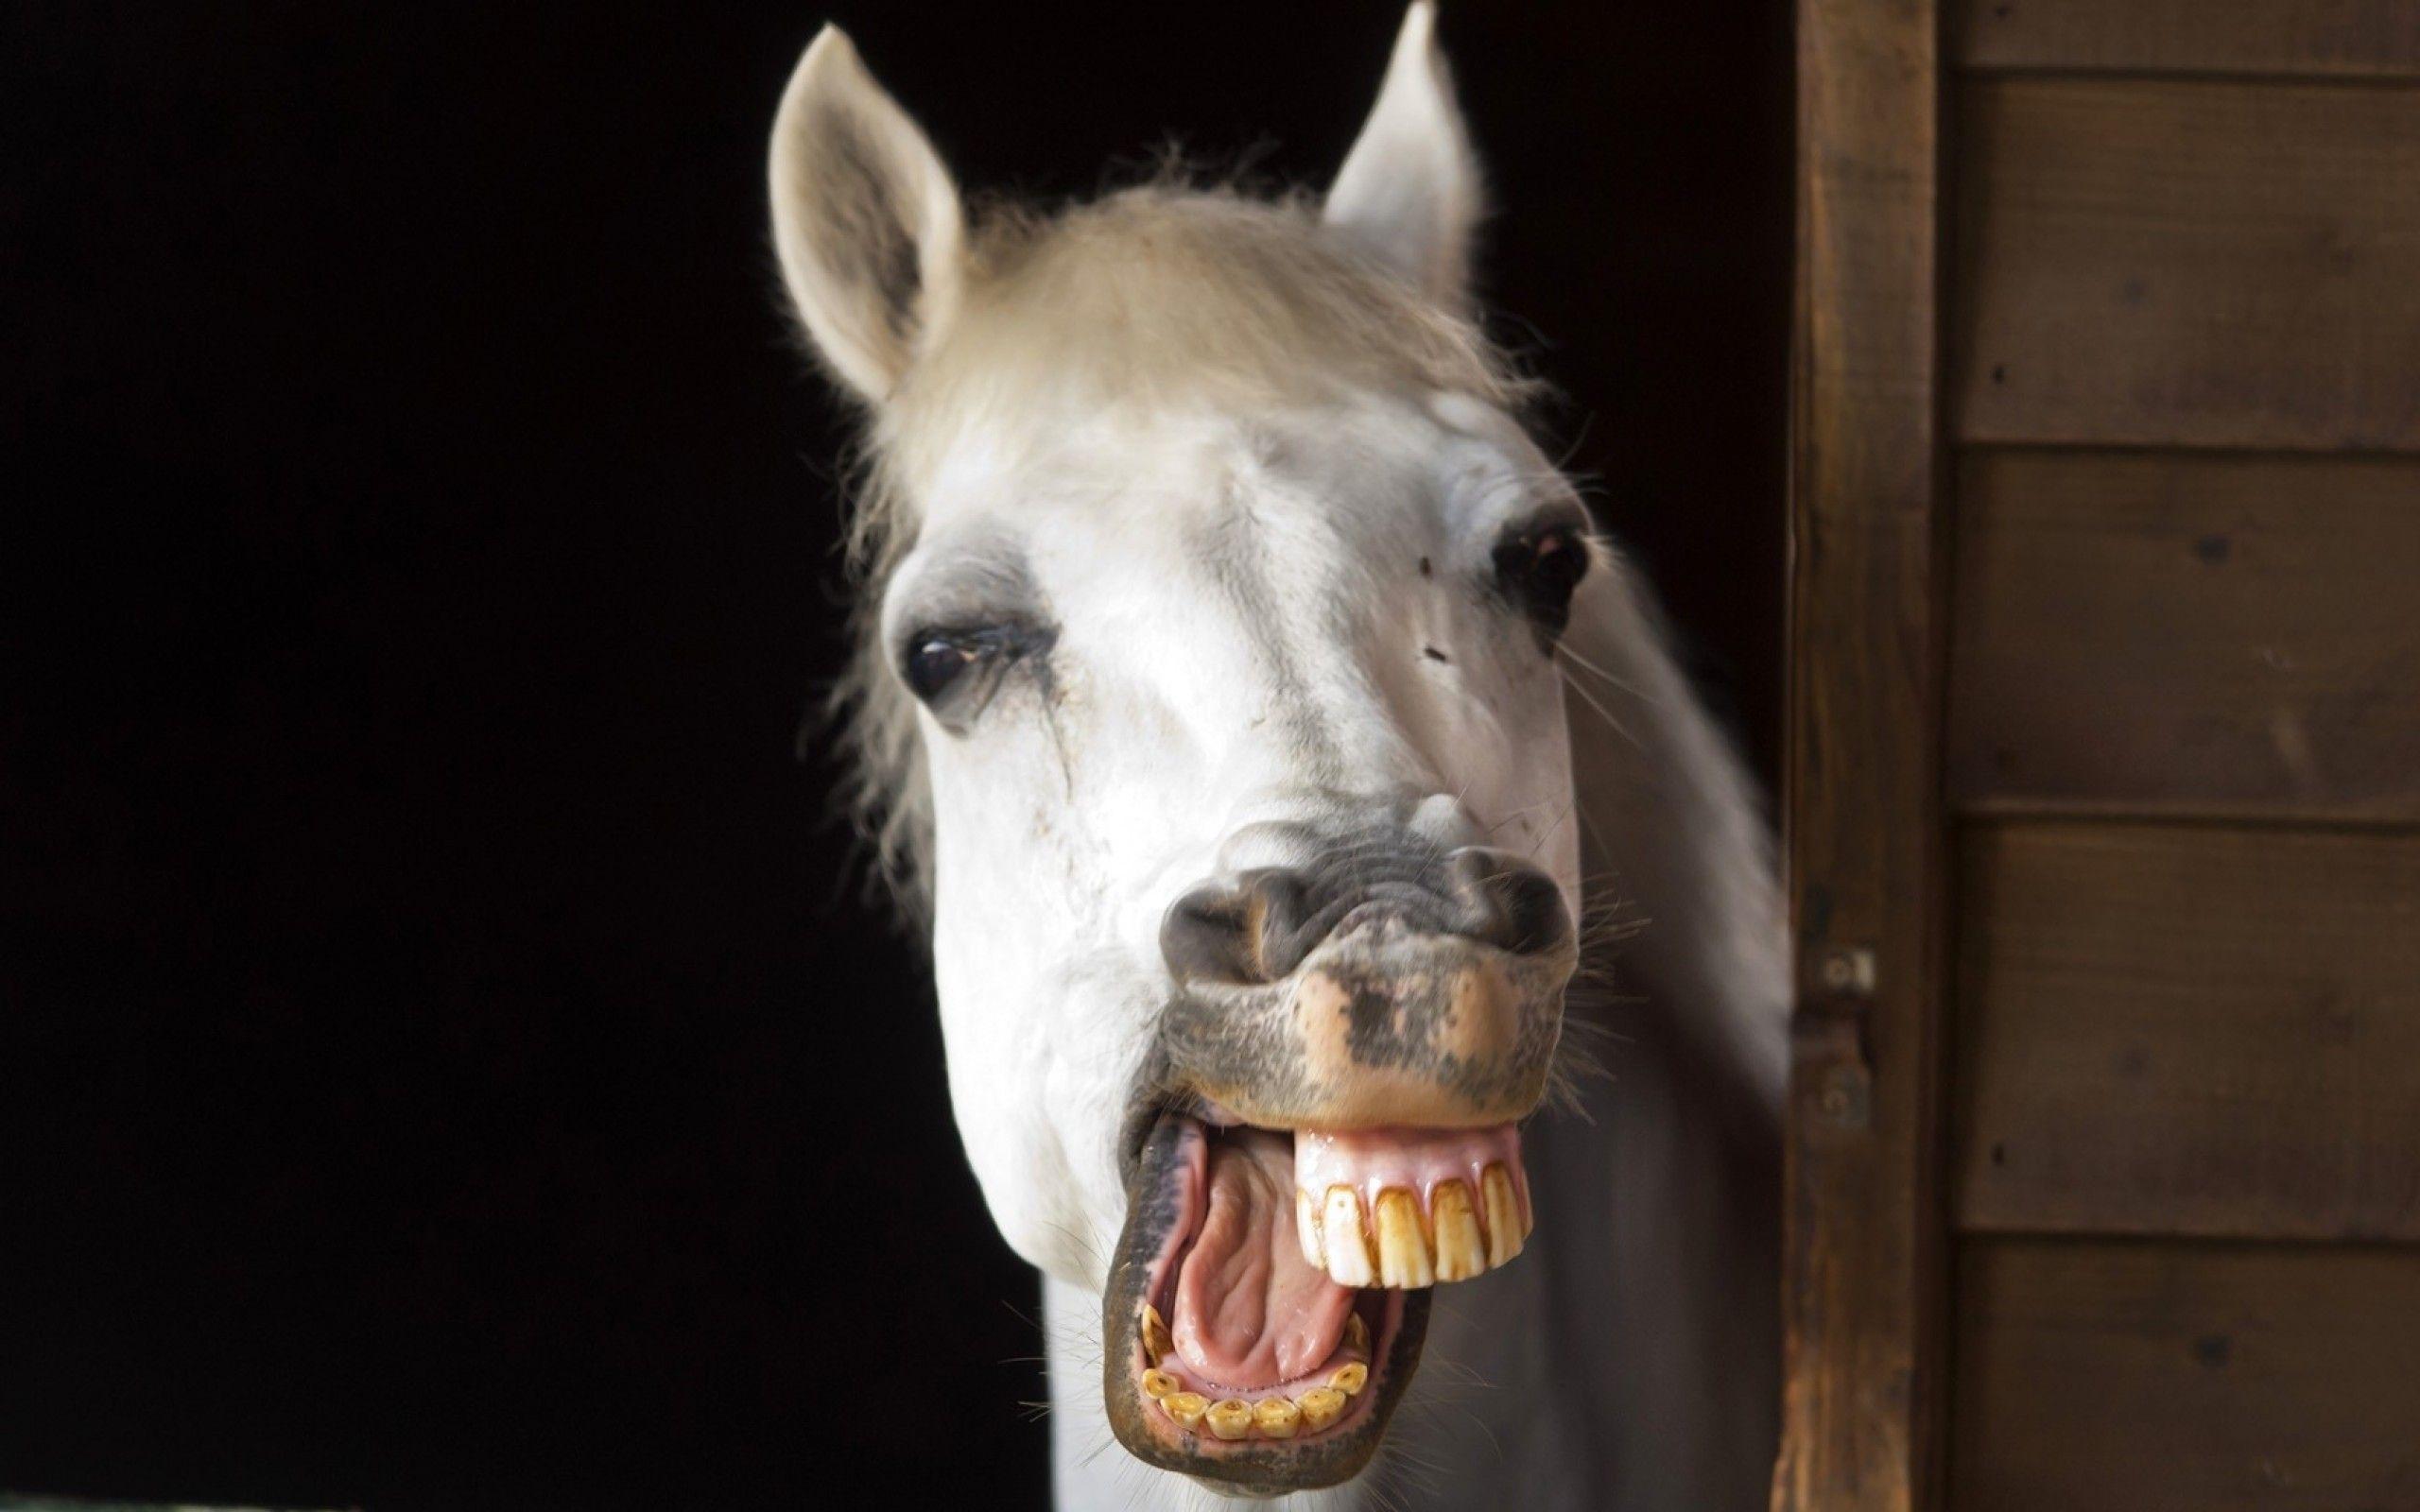 White horse being funny - Wallpaper Cave